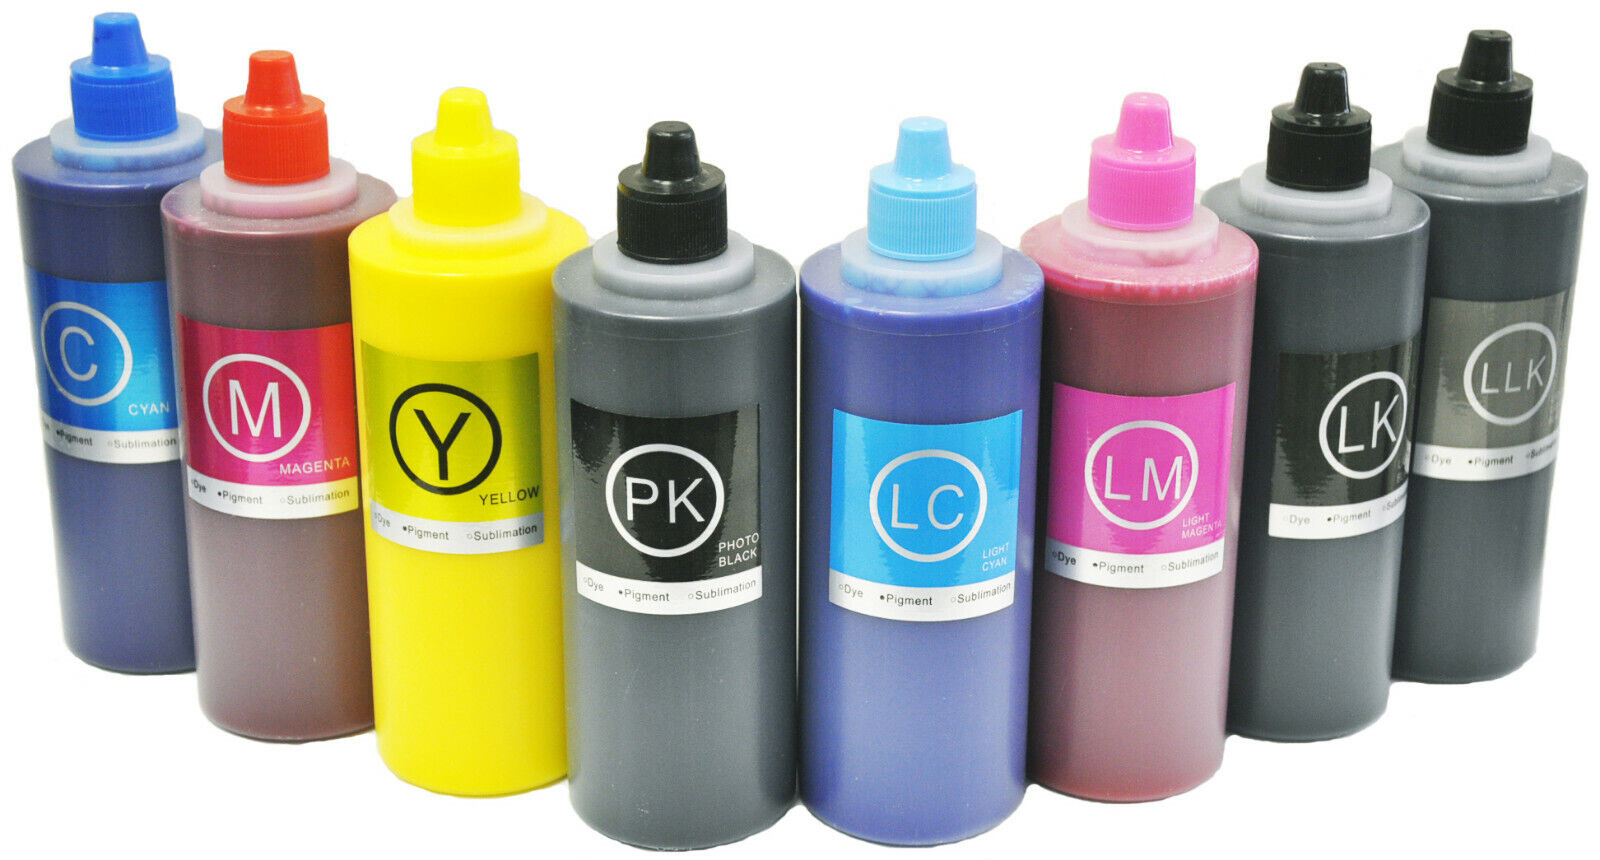 8x200ml UltraChrome K3 Pigment Compatible Ink for Stylus Pro 3800 4800 7800 9800